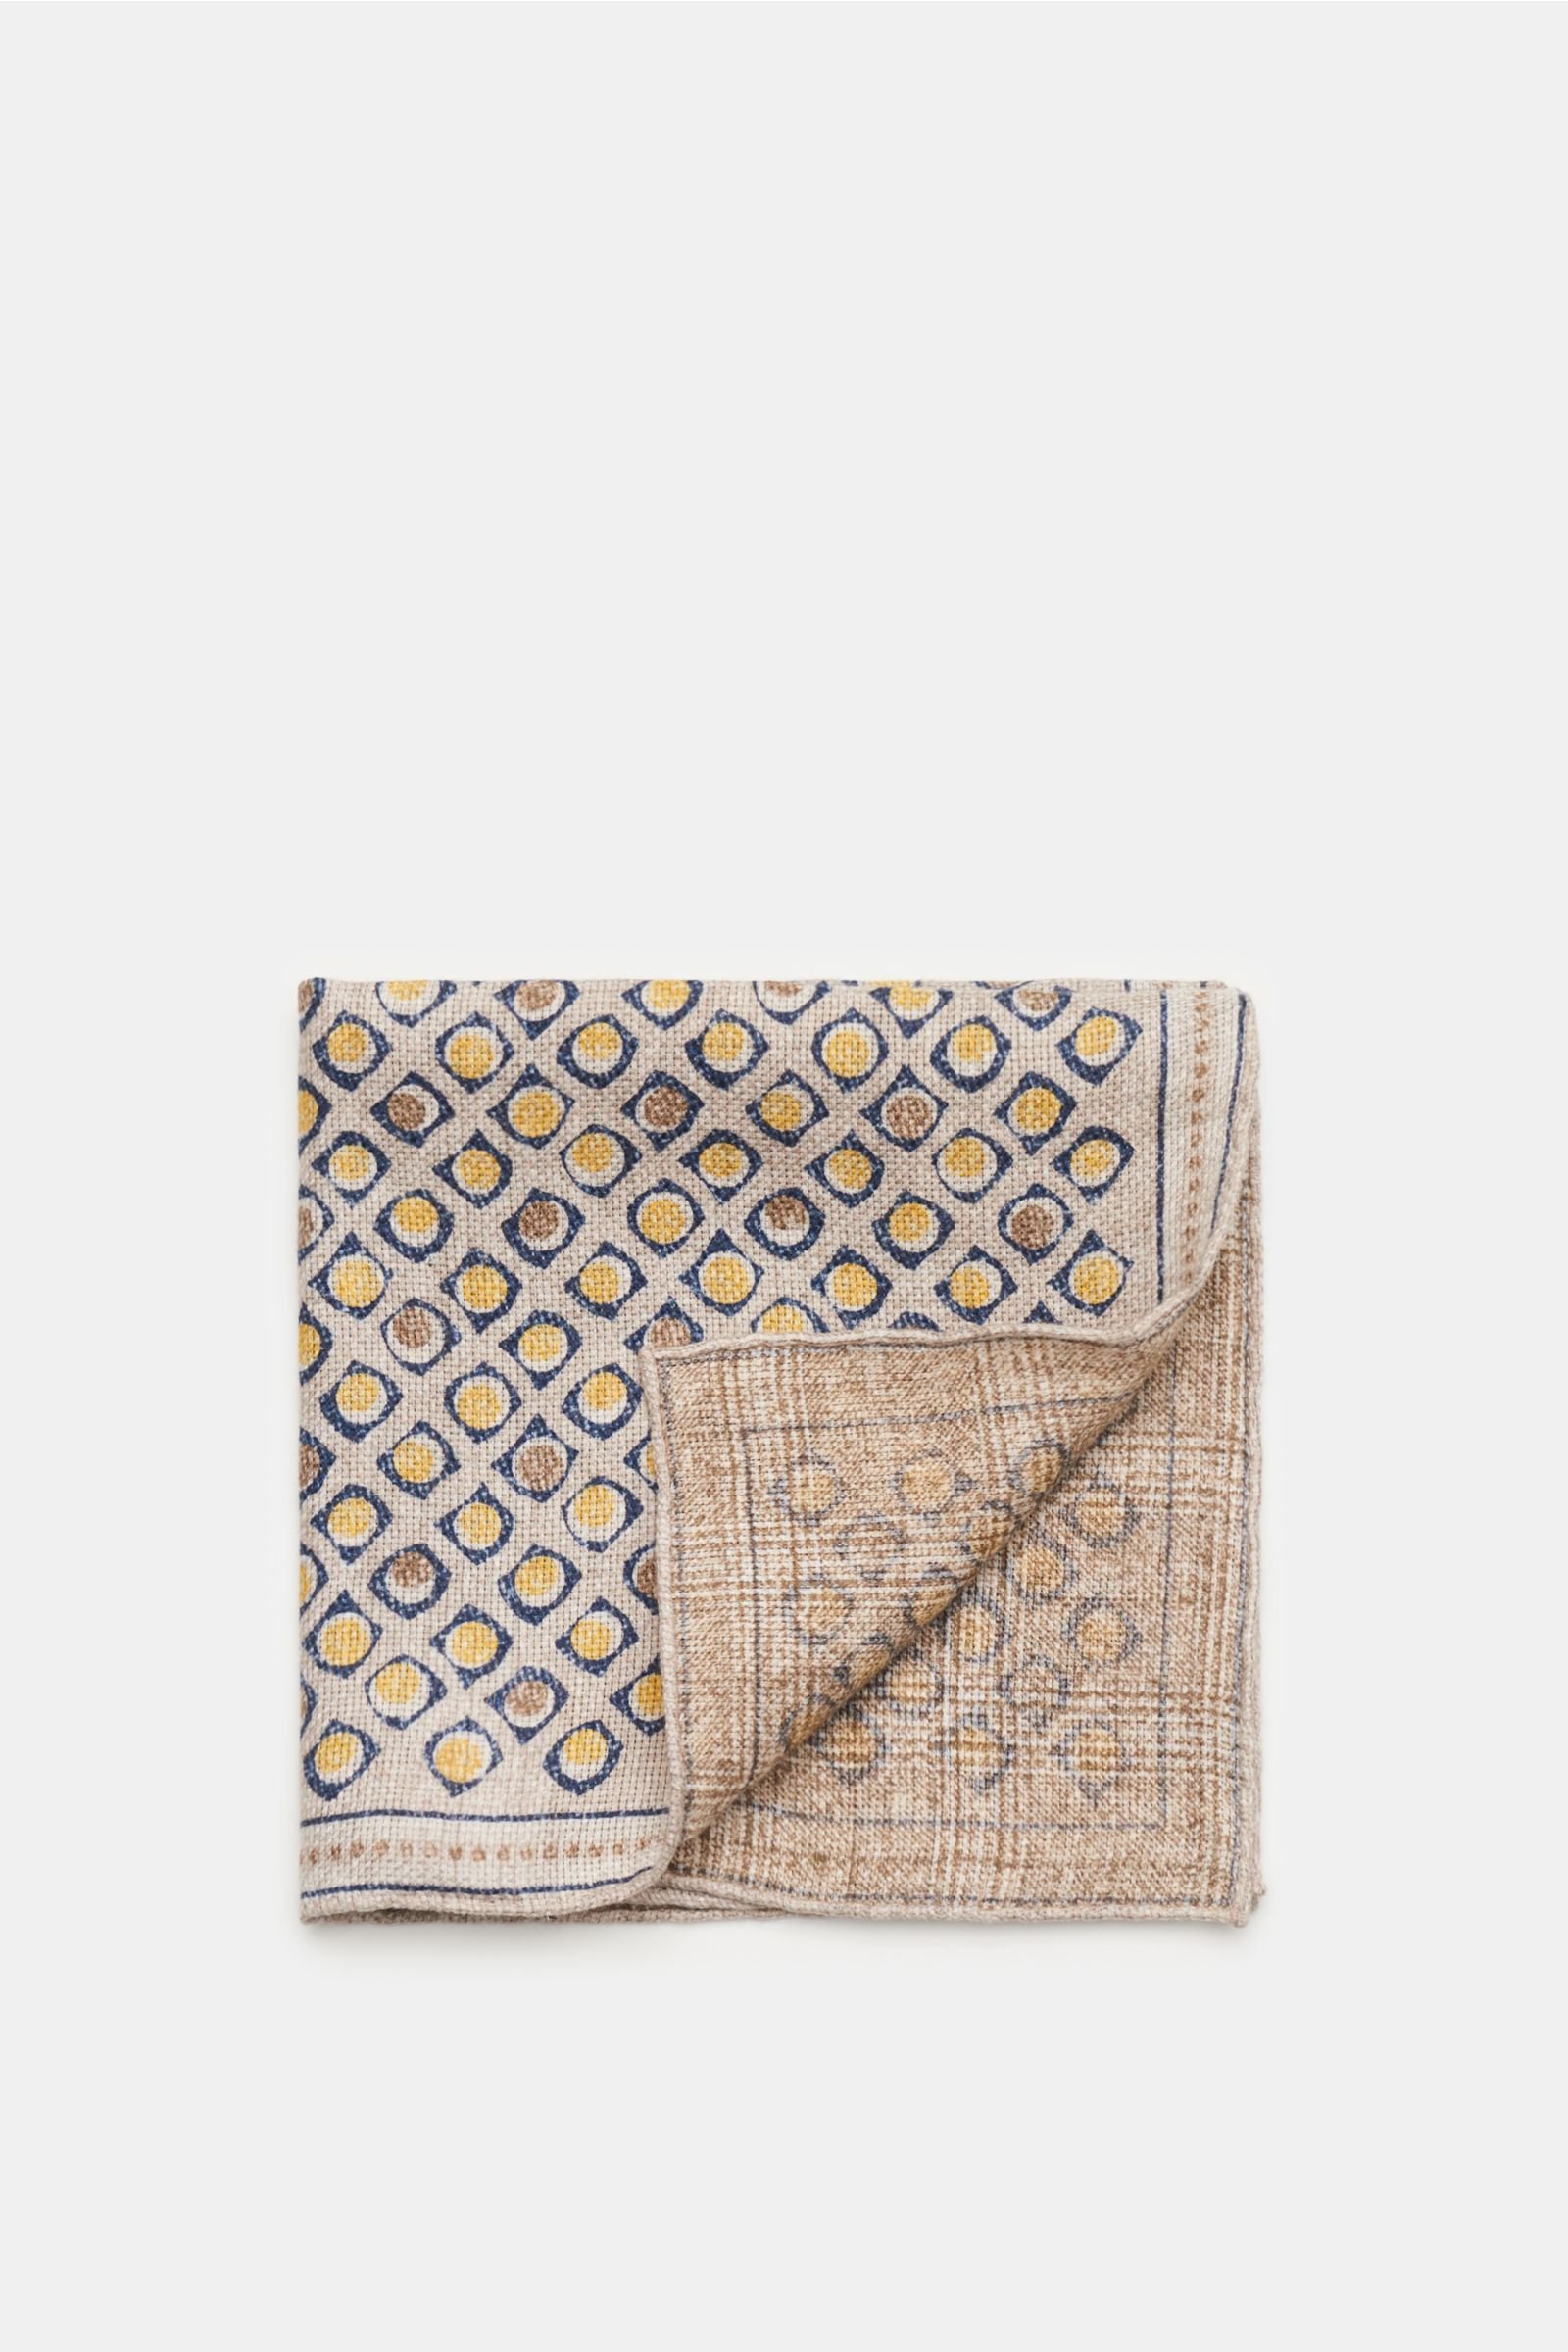 Pocket square beige/yellow patterned